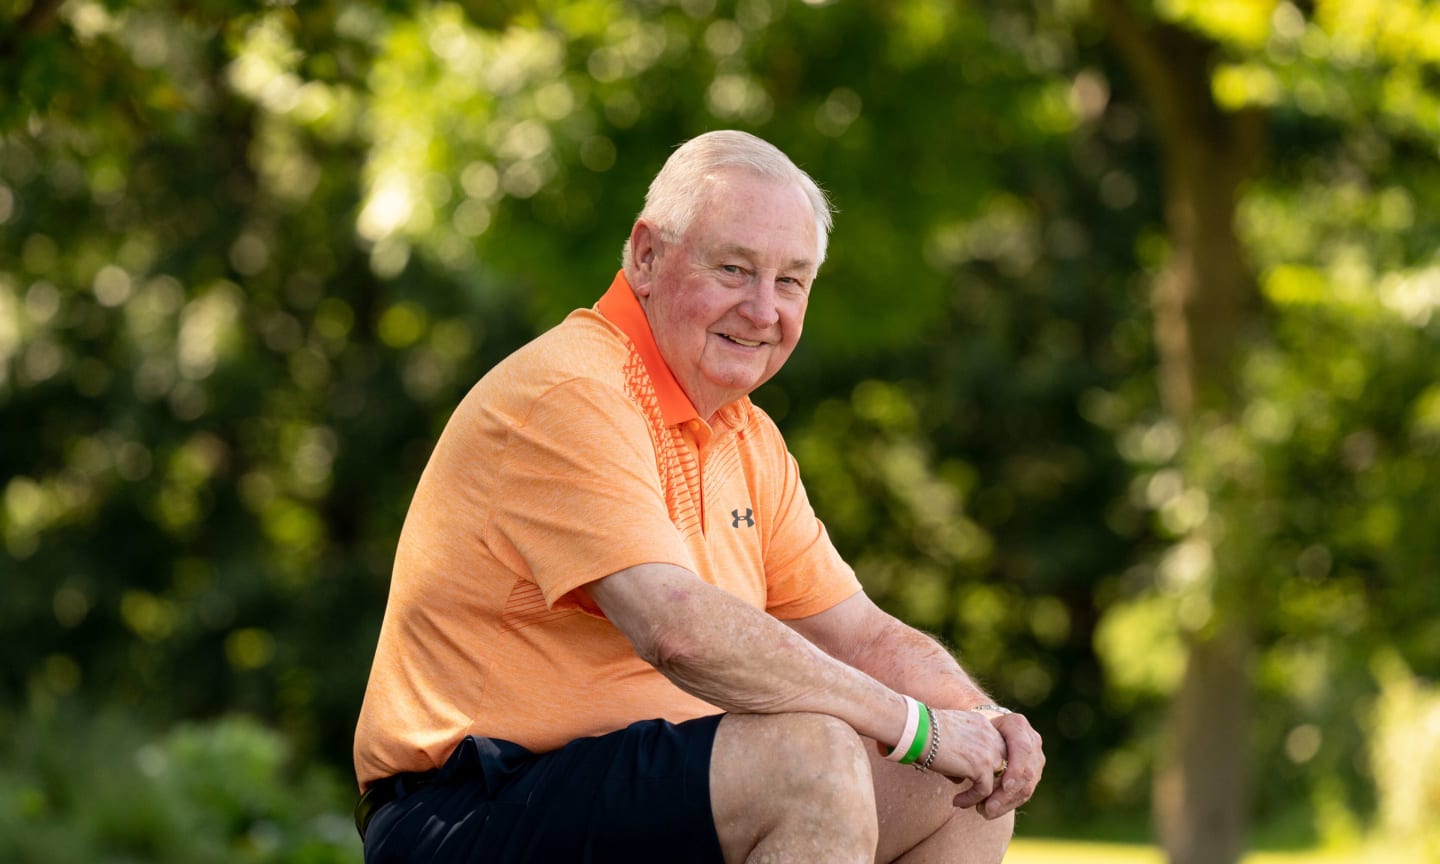 Bill Lawton, wearing an orange polo shirt and black shorts, seated outside on a sunny day